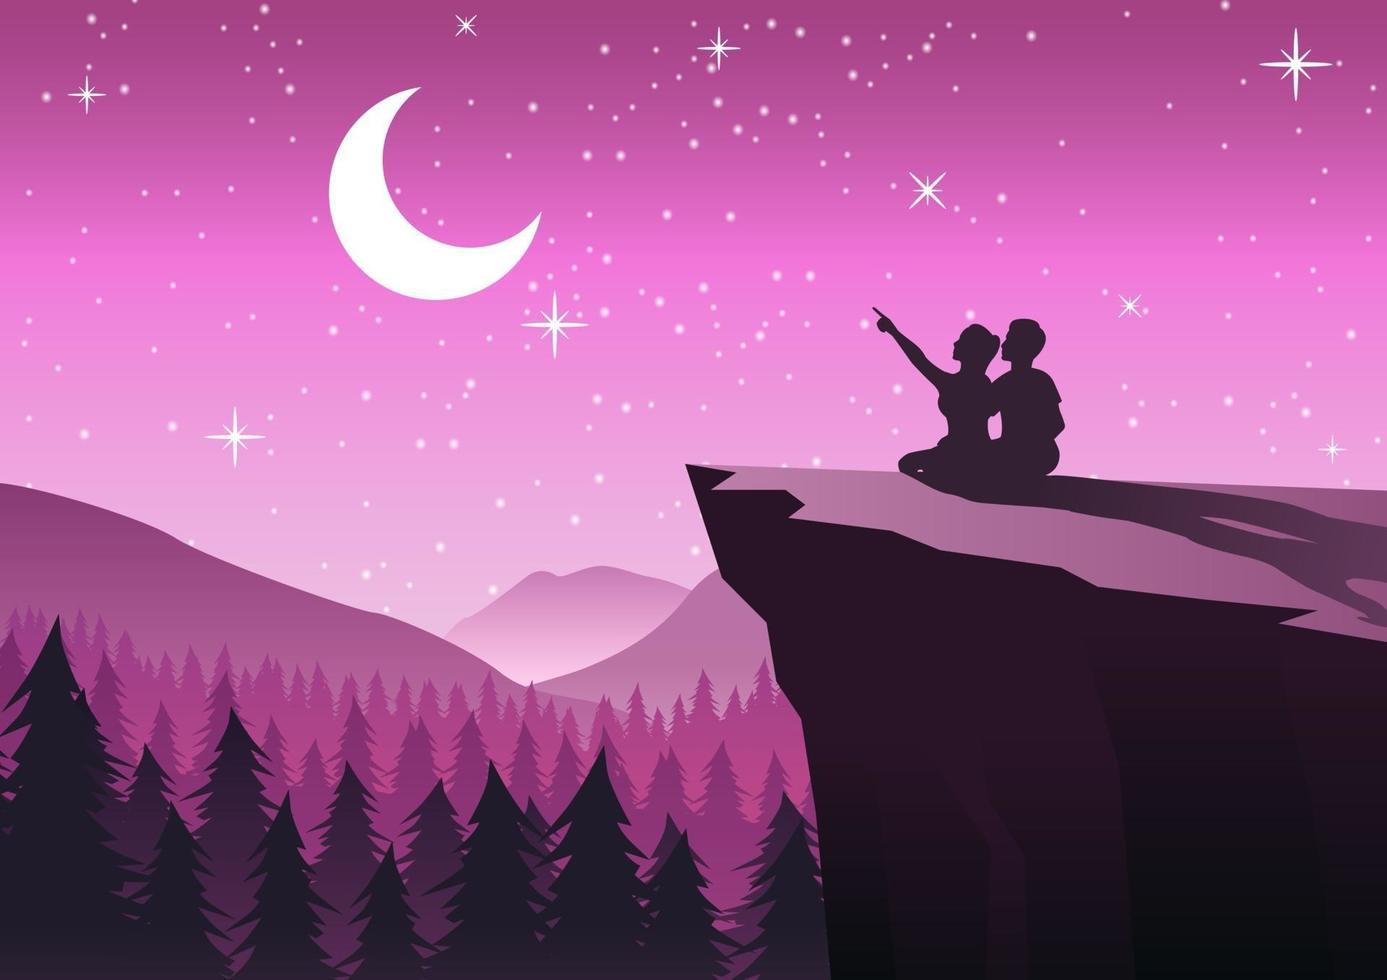 couple pointing to the moon in a night with stars sitting on cliff and close to a pine forest vector